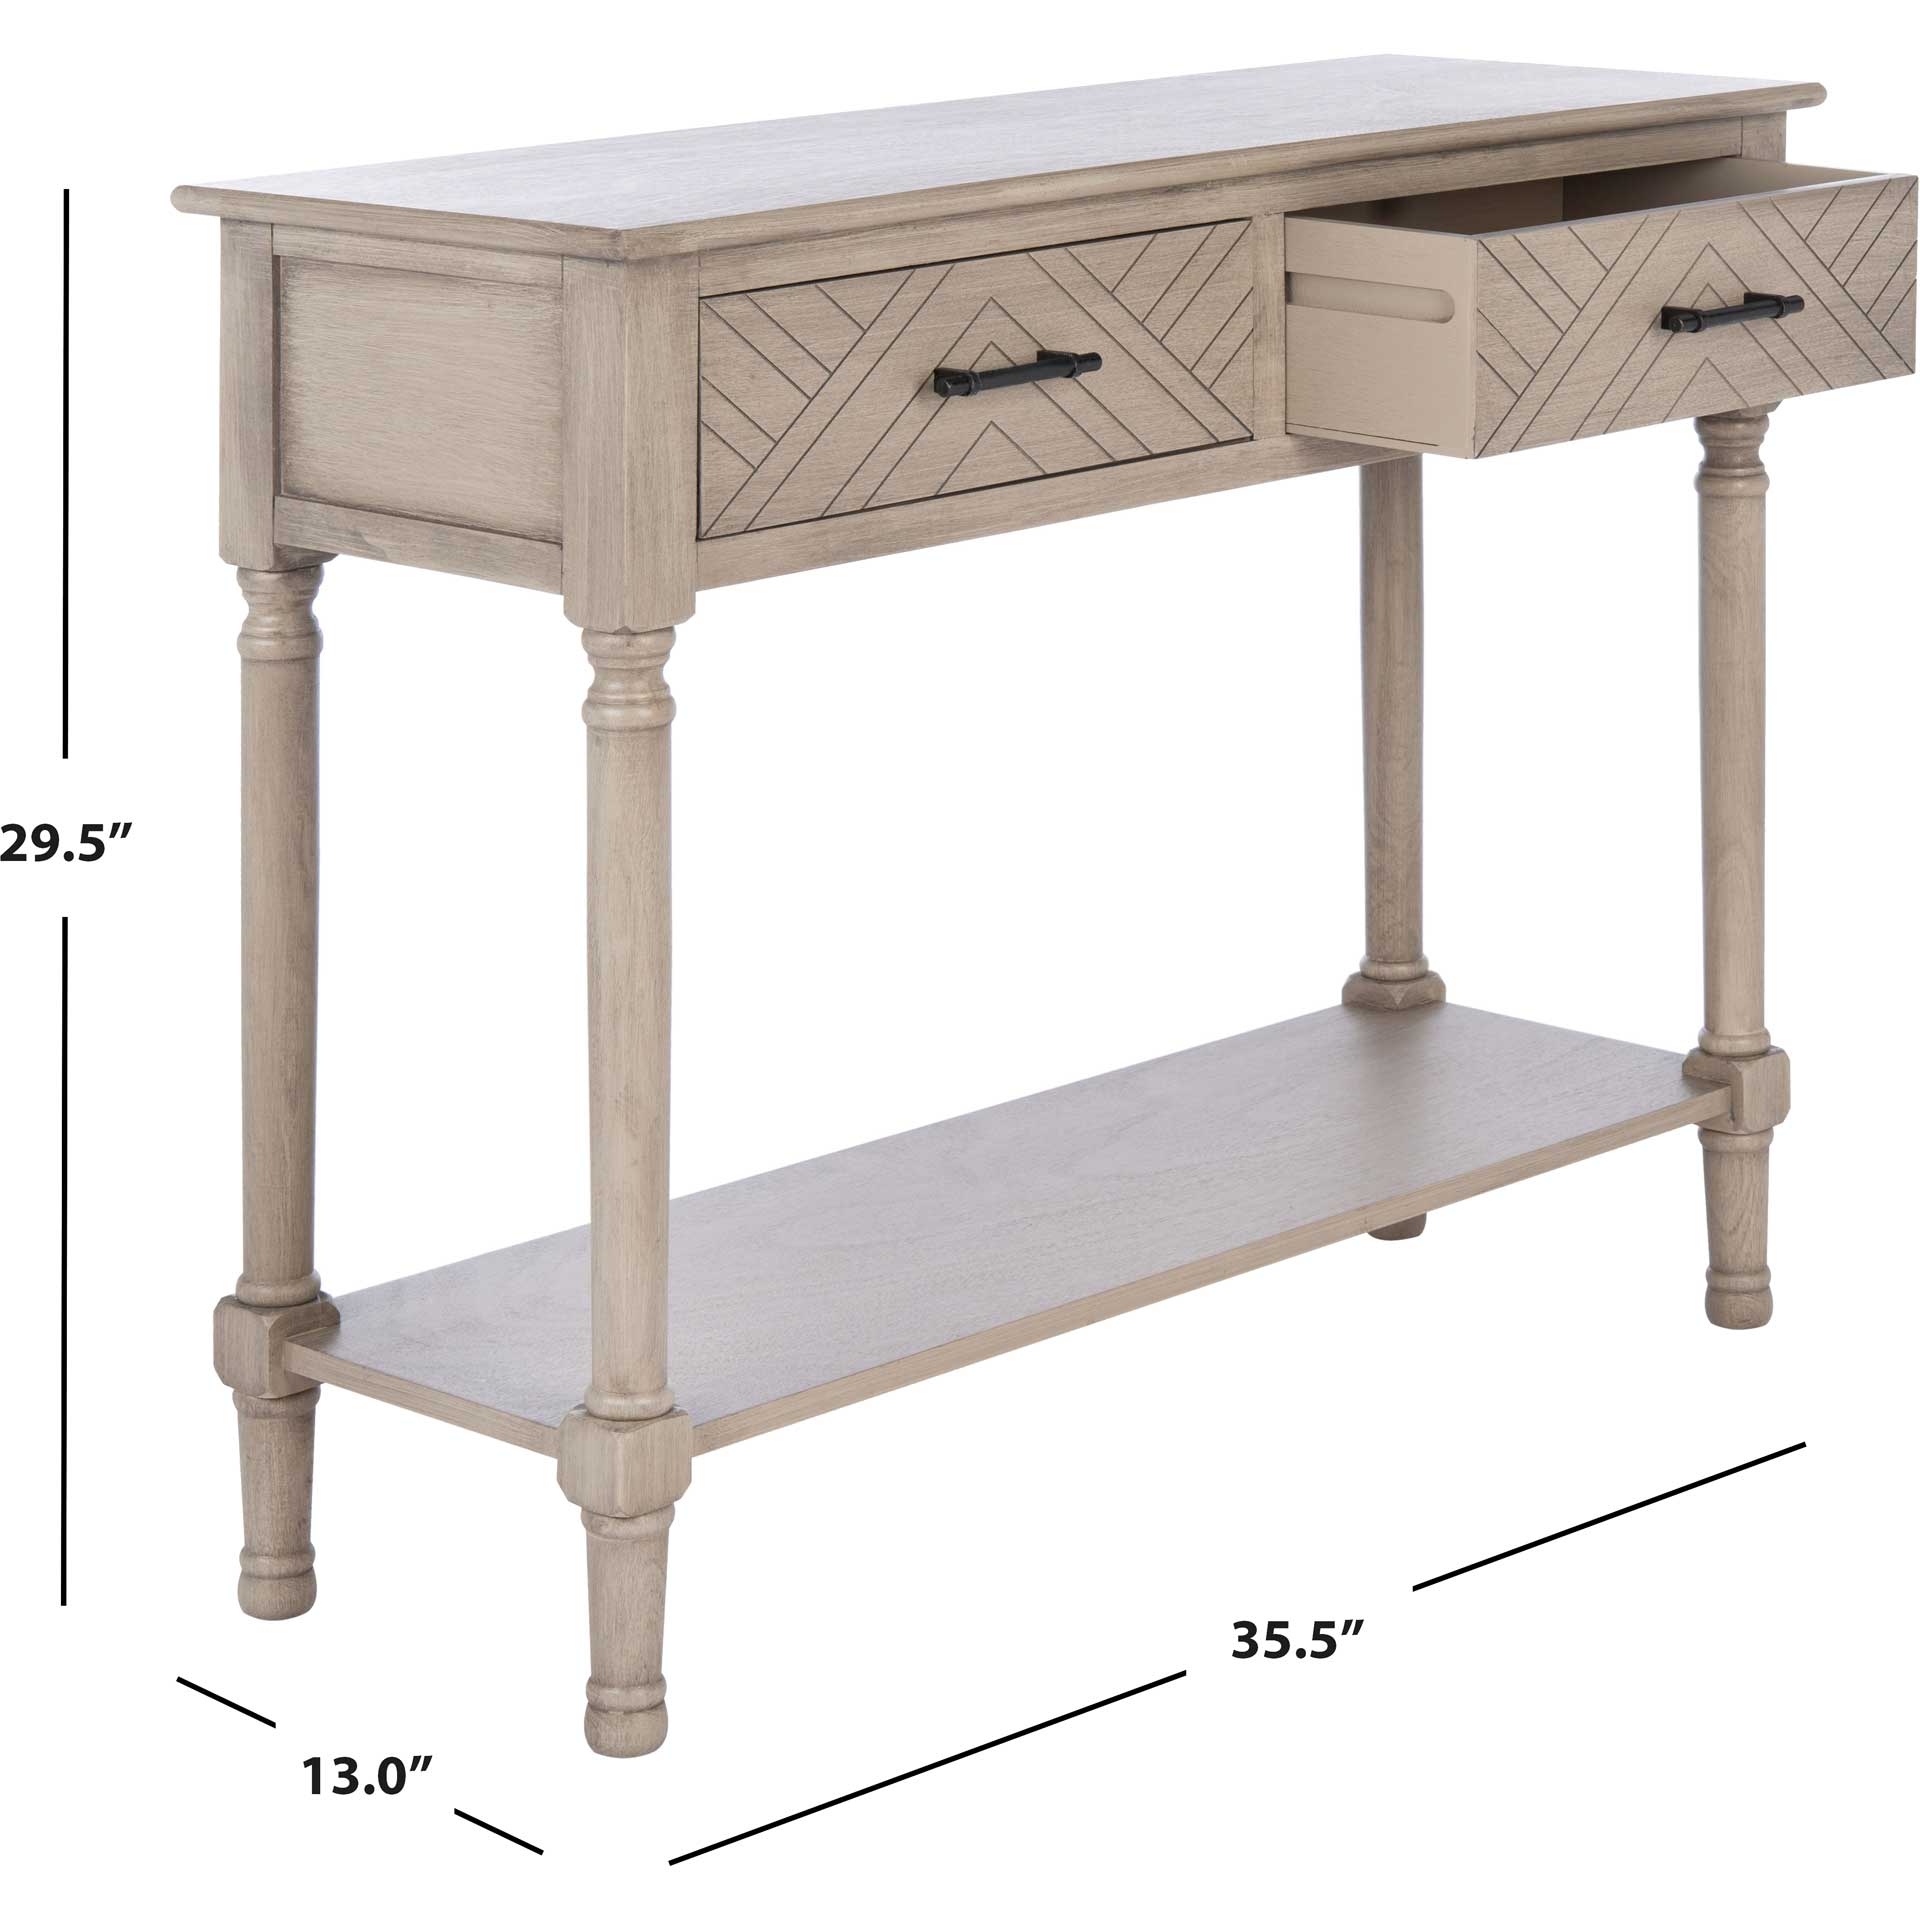 Pebbles 2 Drawer Console Table Greige